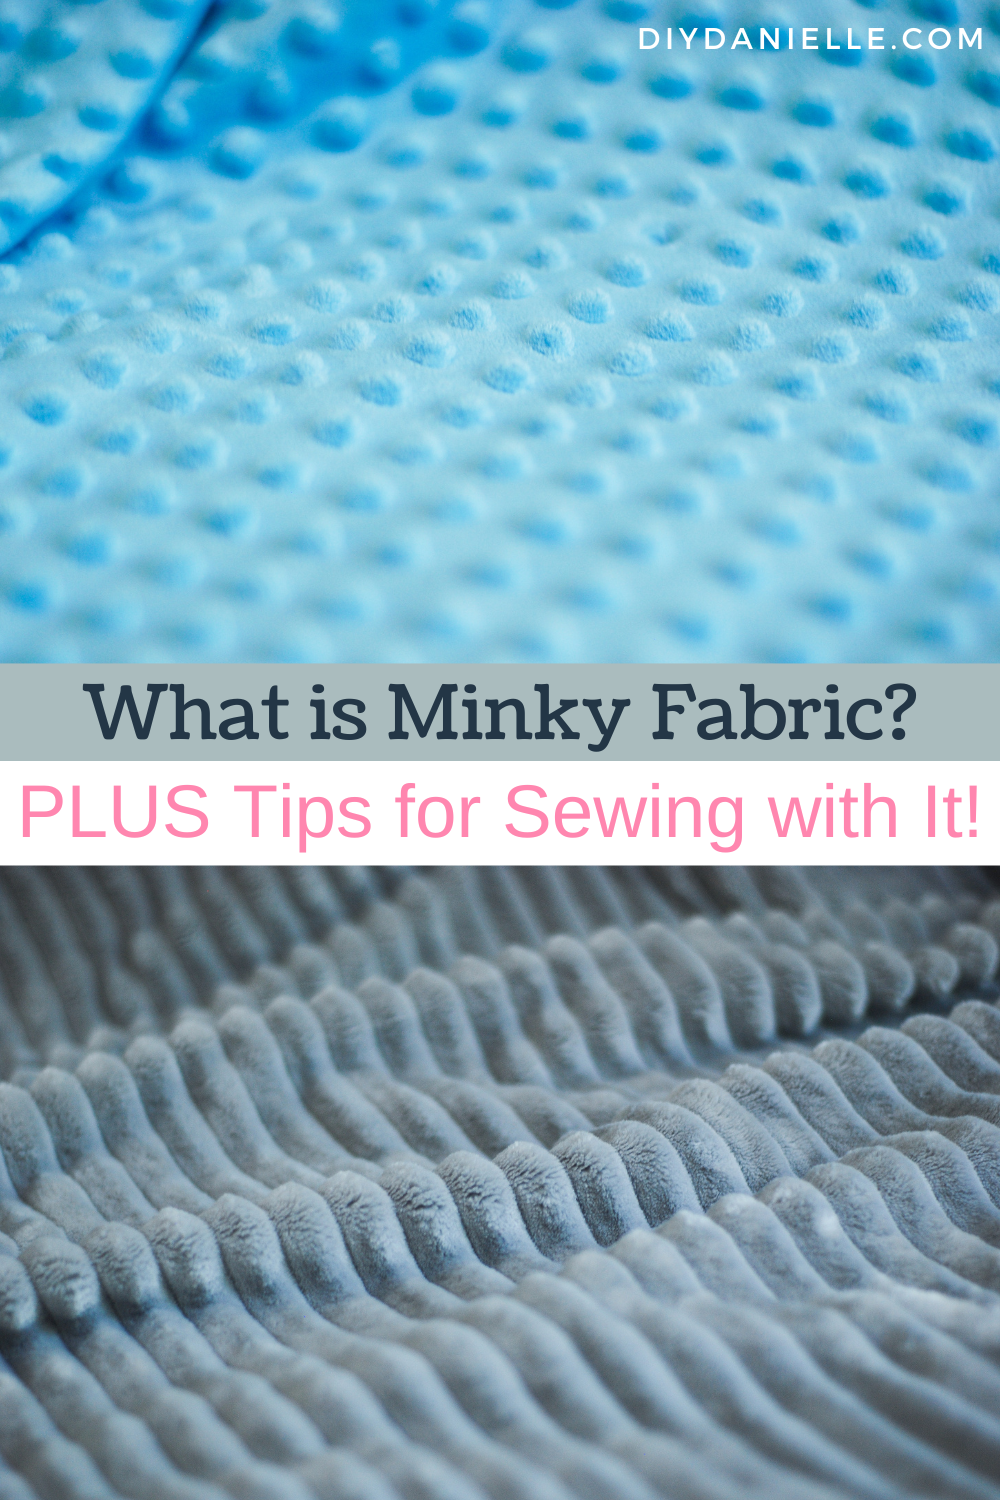 What is Plush or Minky fabric? - SewGuide